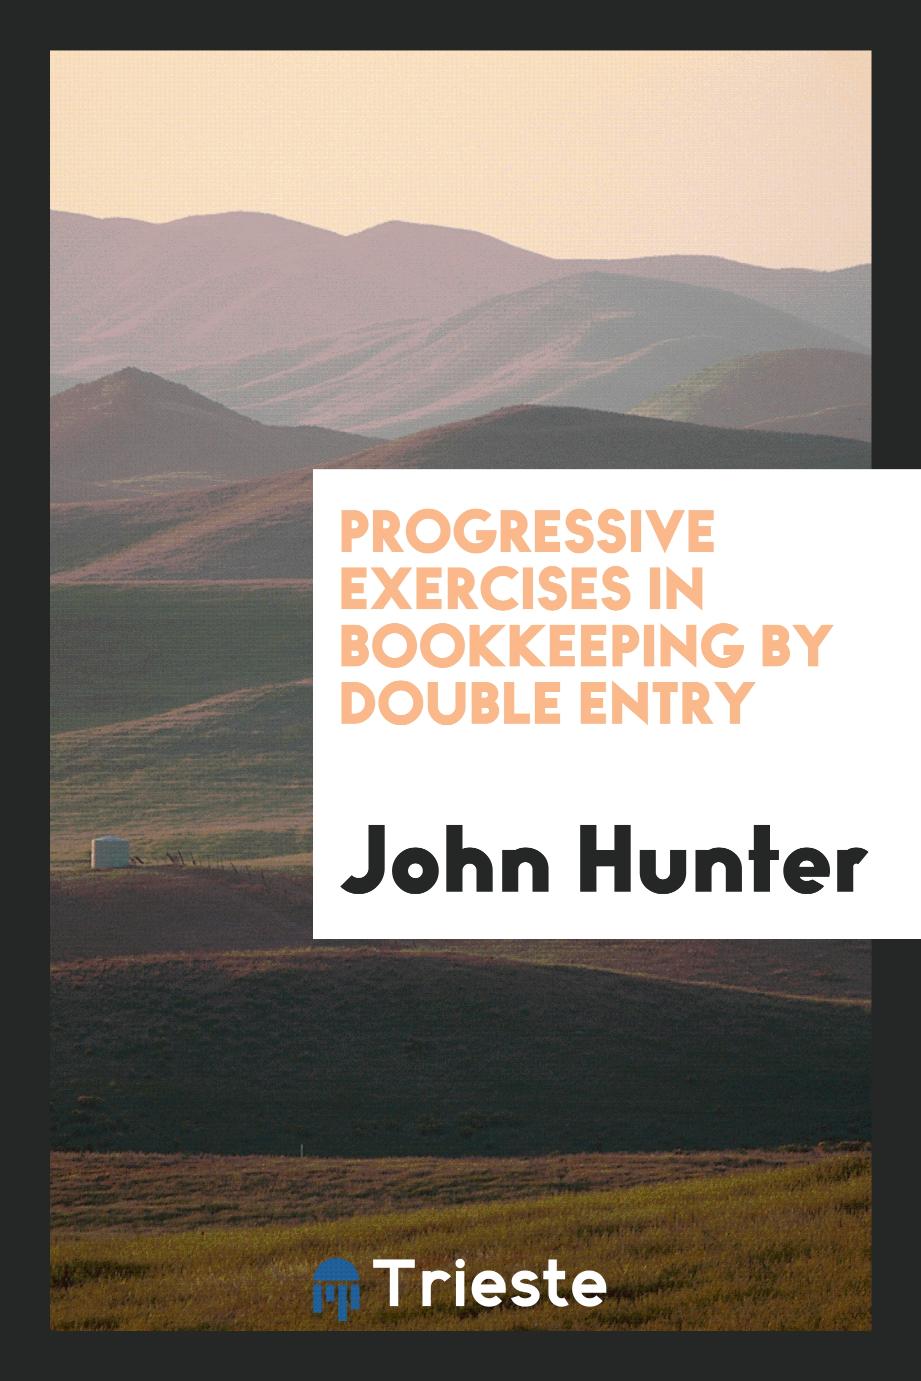 Progressive exercises in bookkeeping by double entry